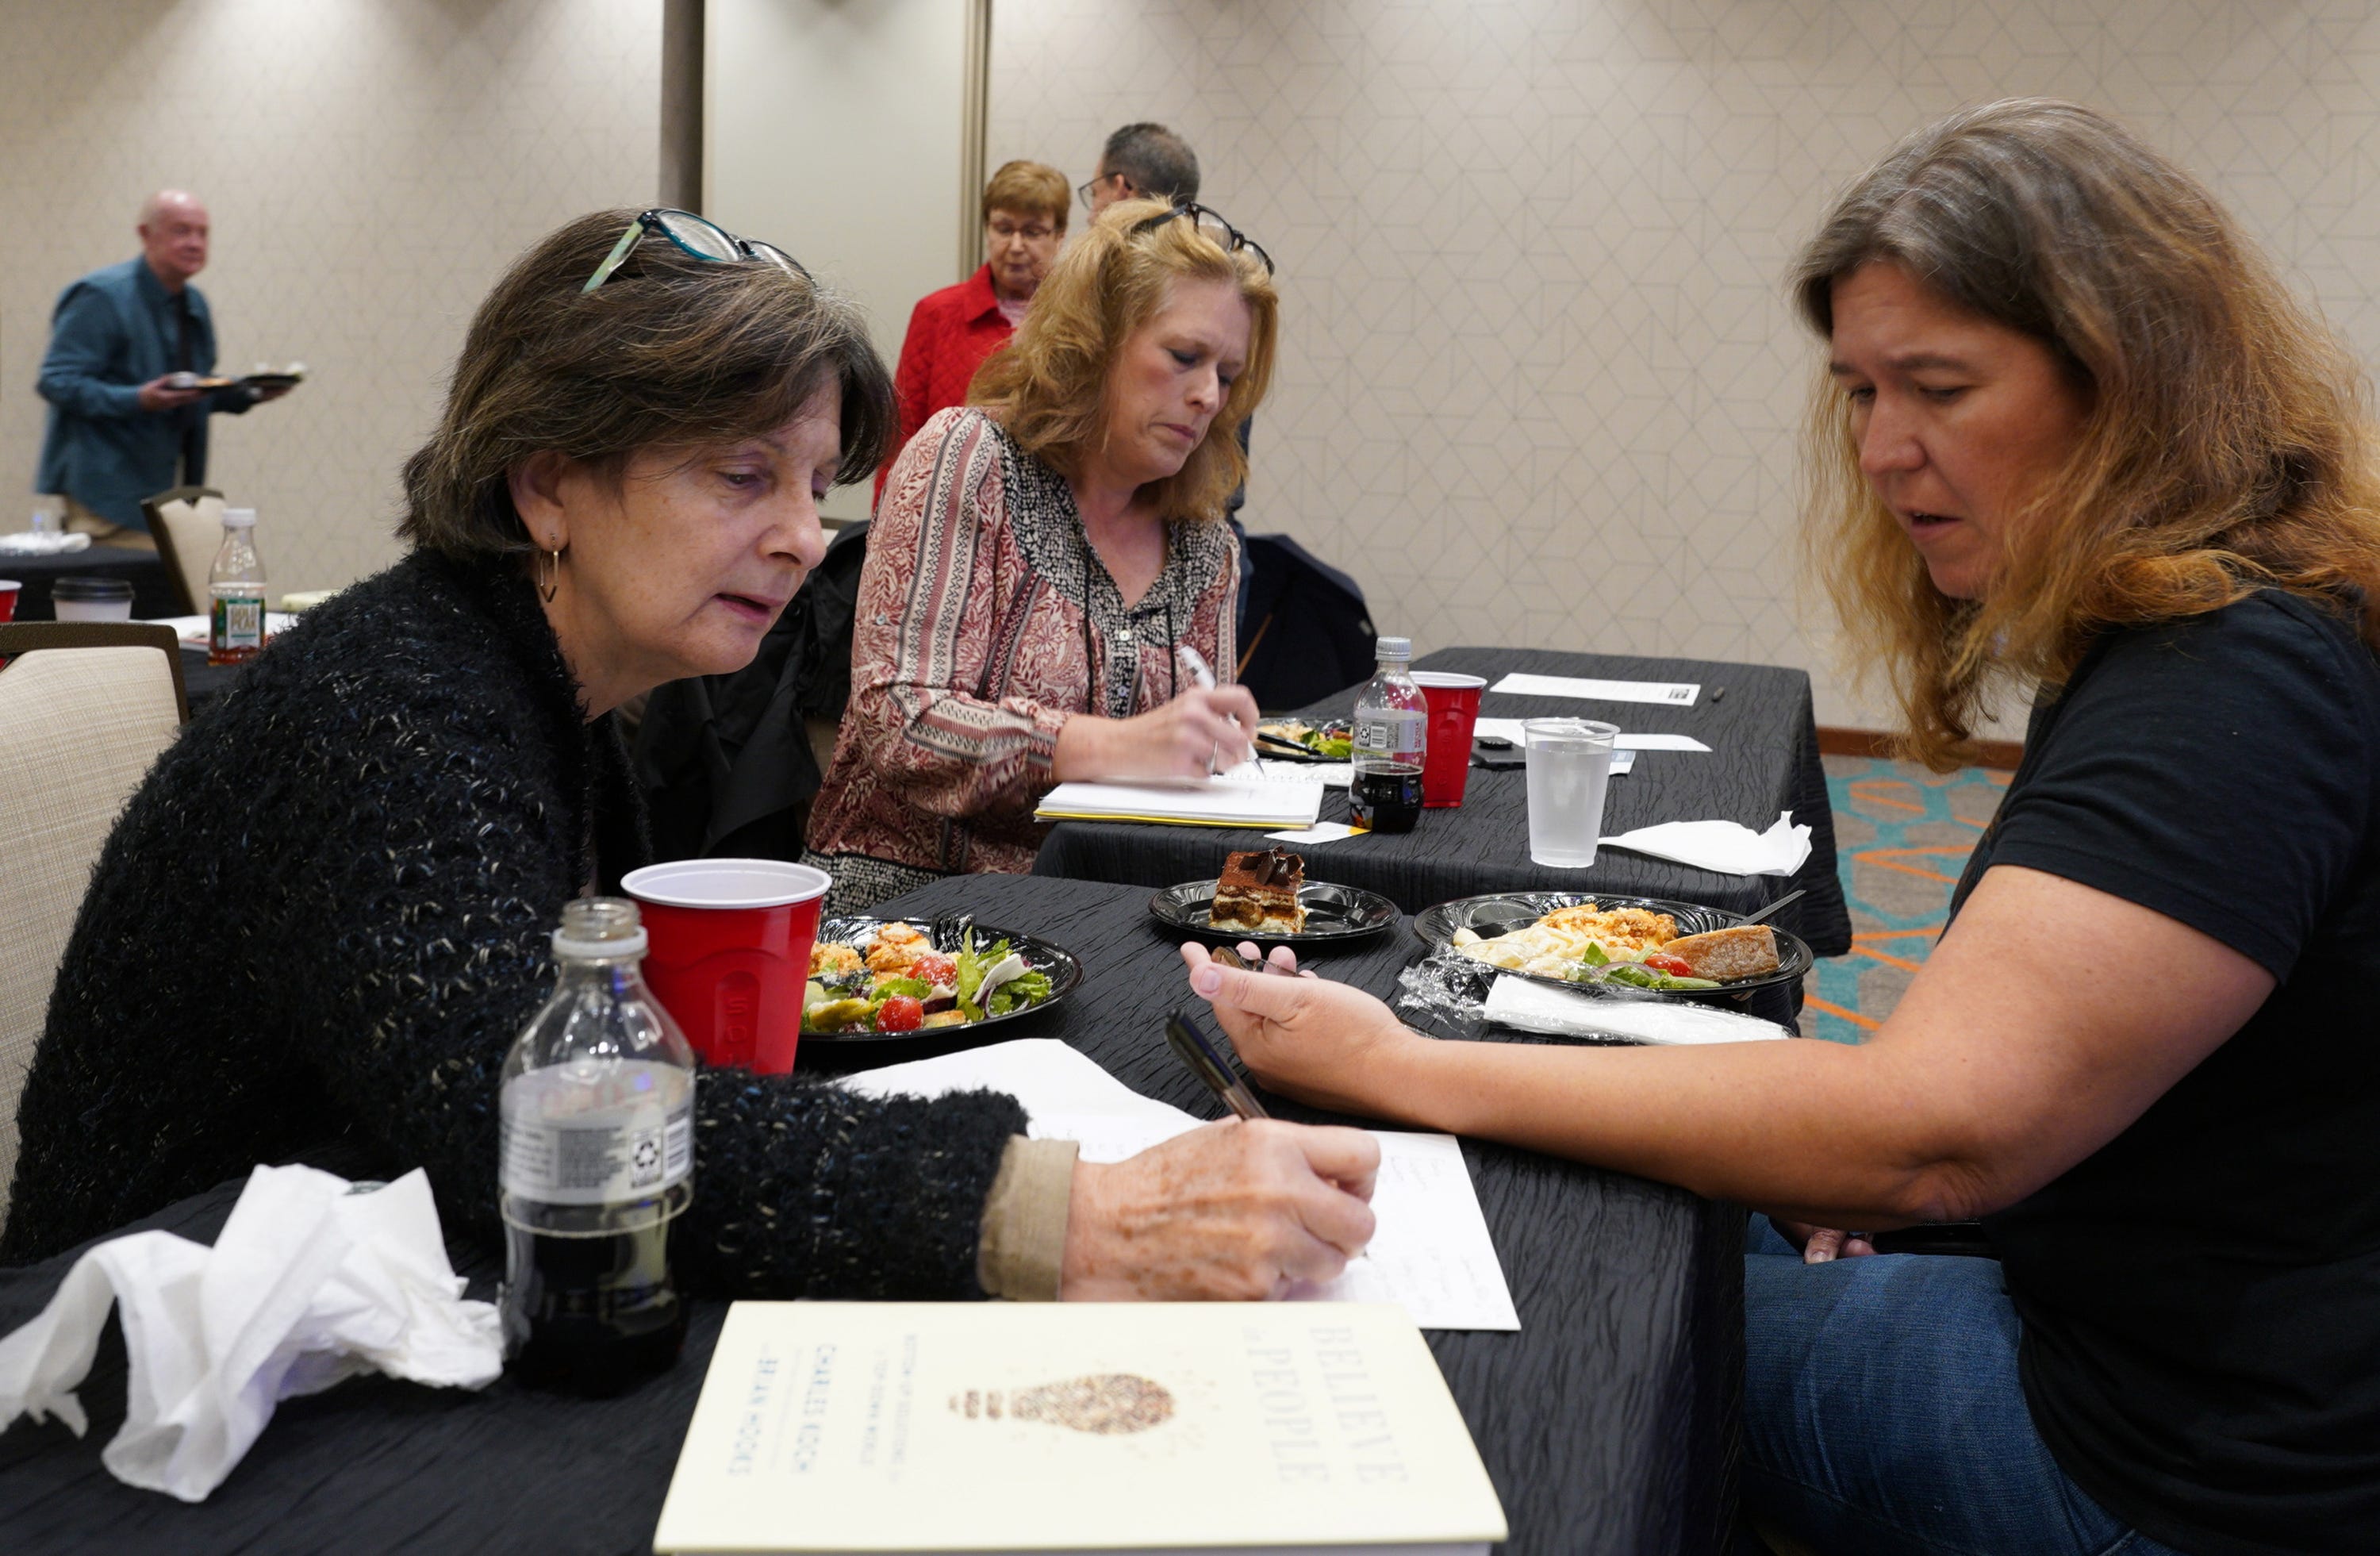 Barbara Phillips, Laura Fletcher and Celeste Garrett (left to right) share ideas during a lunch break at the Virginia Education Opportunity Alliance Saturday meeting which was offering free training for citizens to learn best practices to advance education choice.